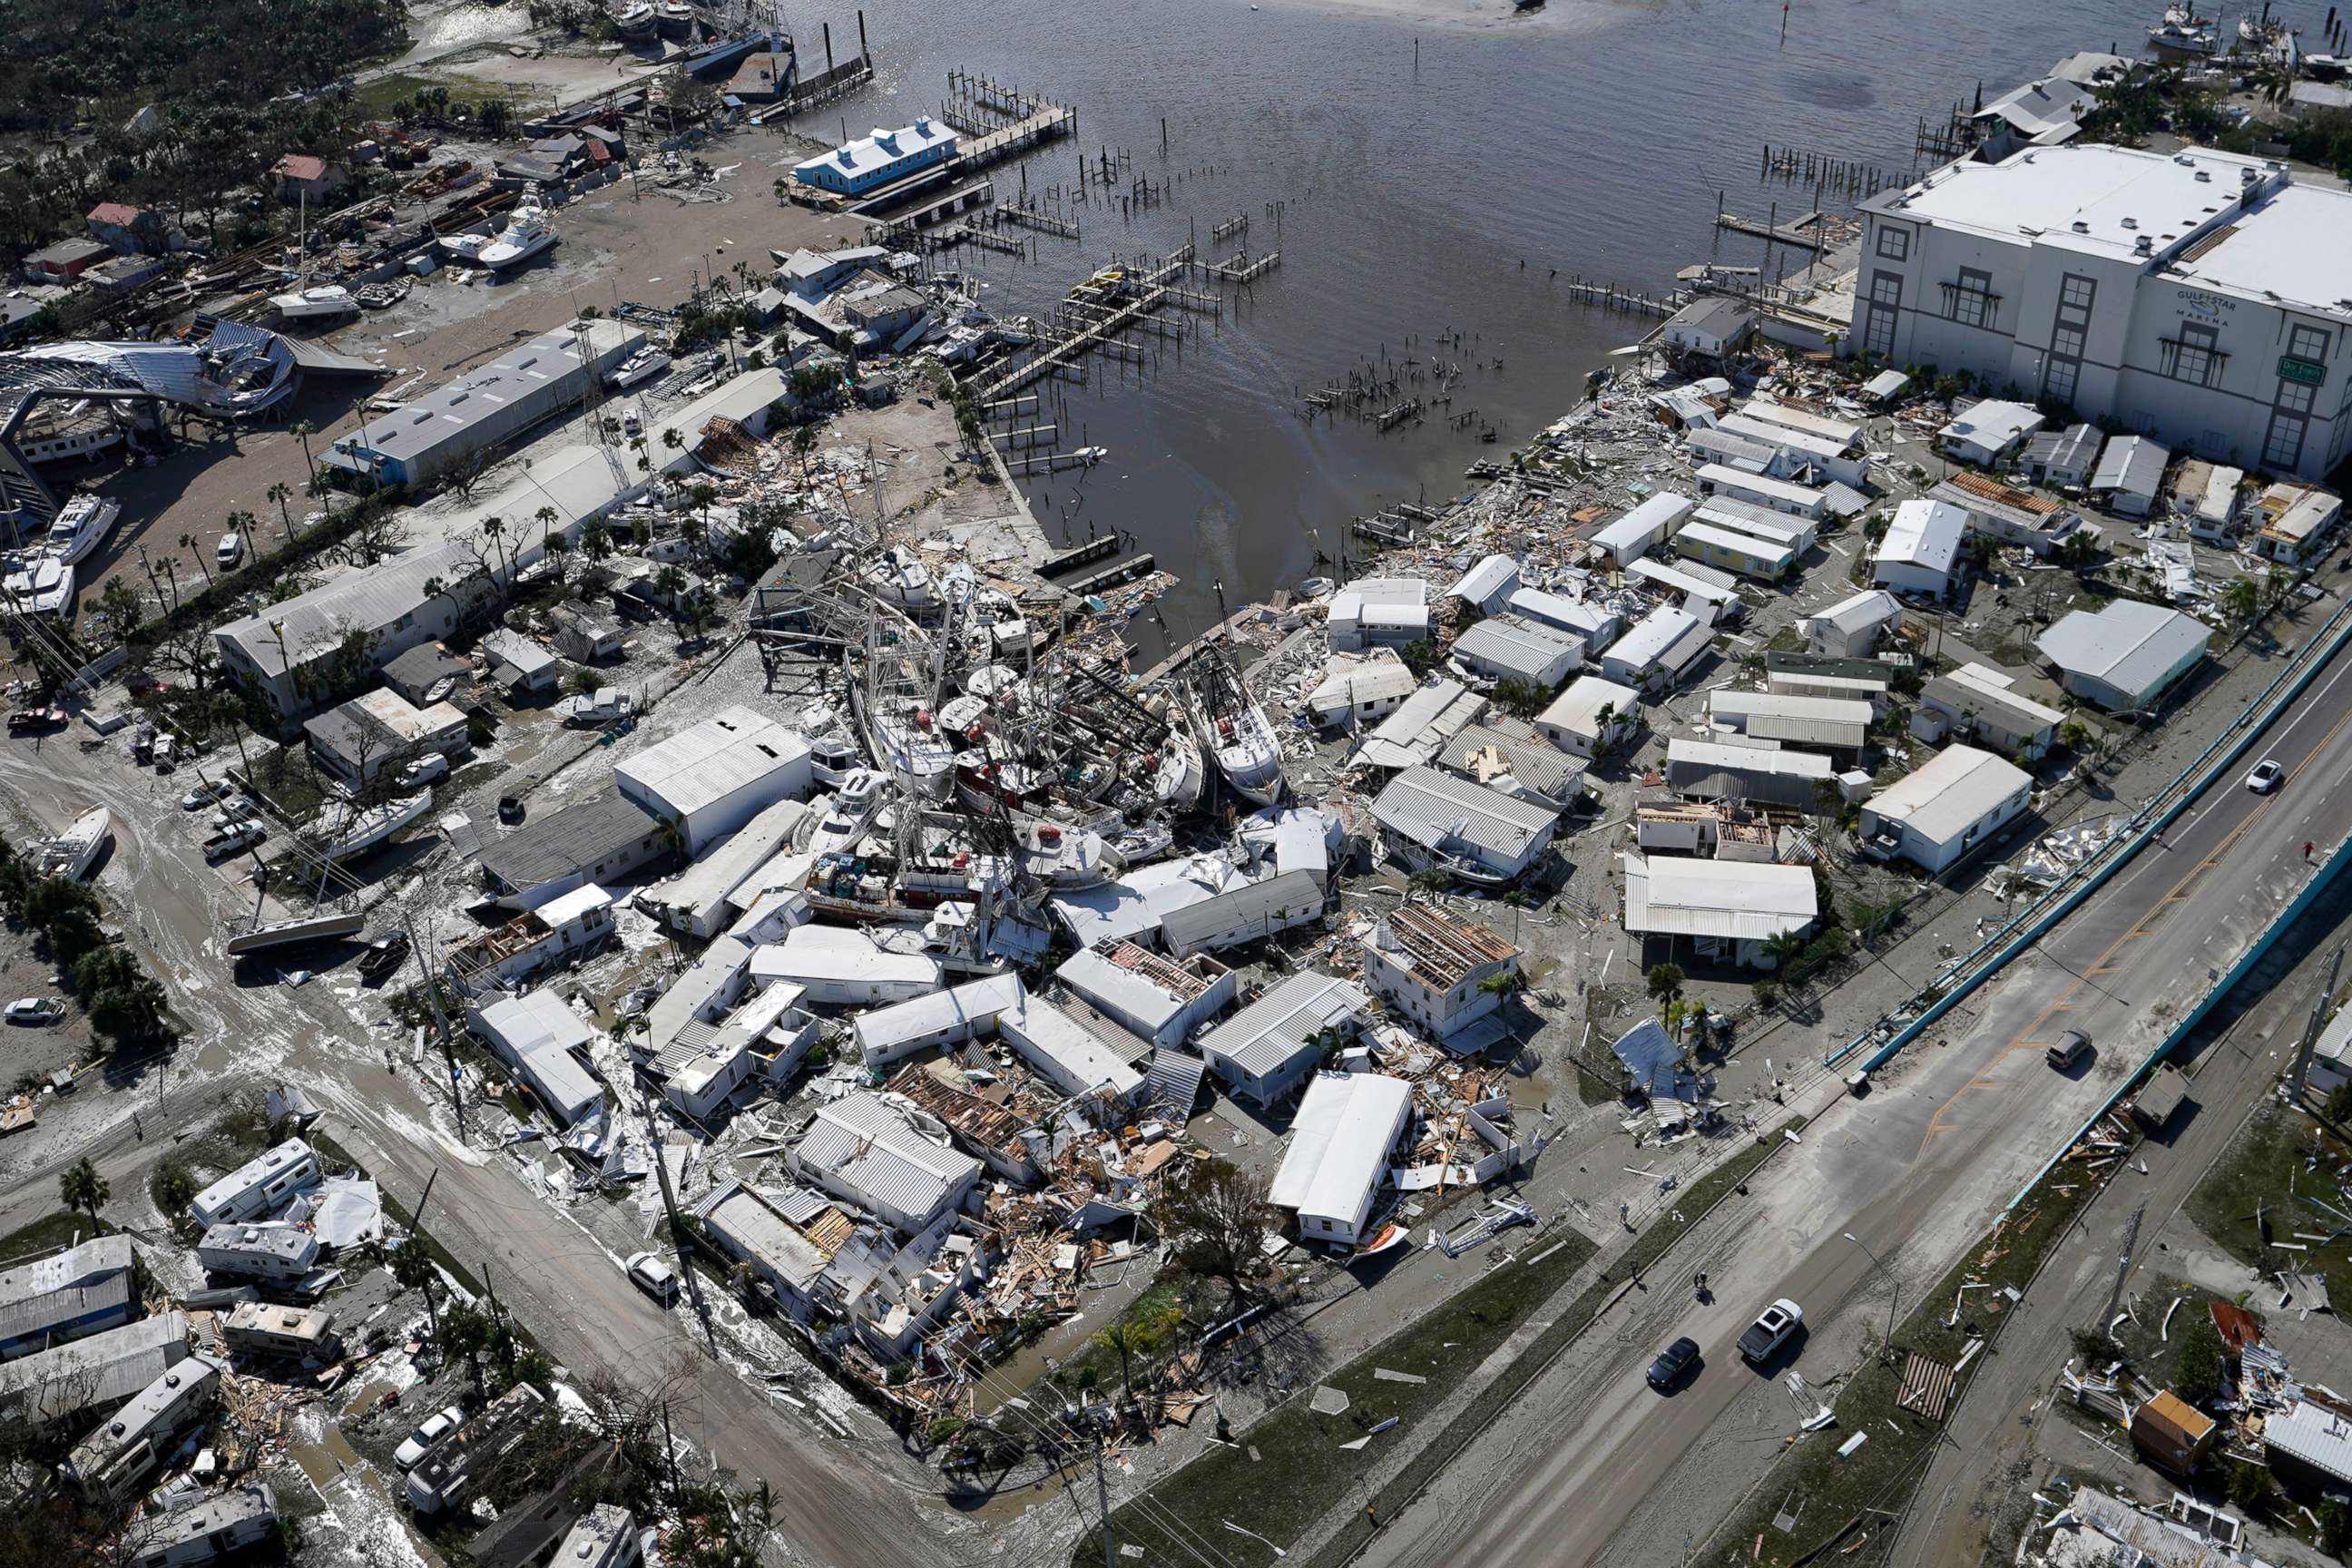 PHOTO: Damages boats lie on the land and water in the aftermath of Hurricane Ian, Sept. 29, 2022, in Fort Myers, Fla.